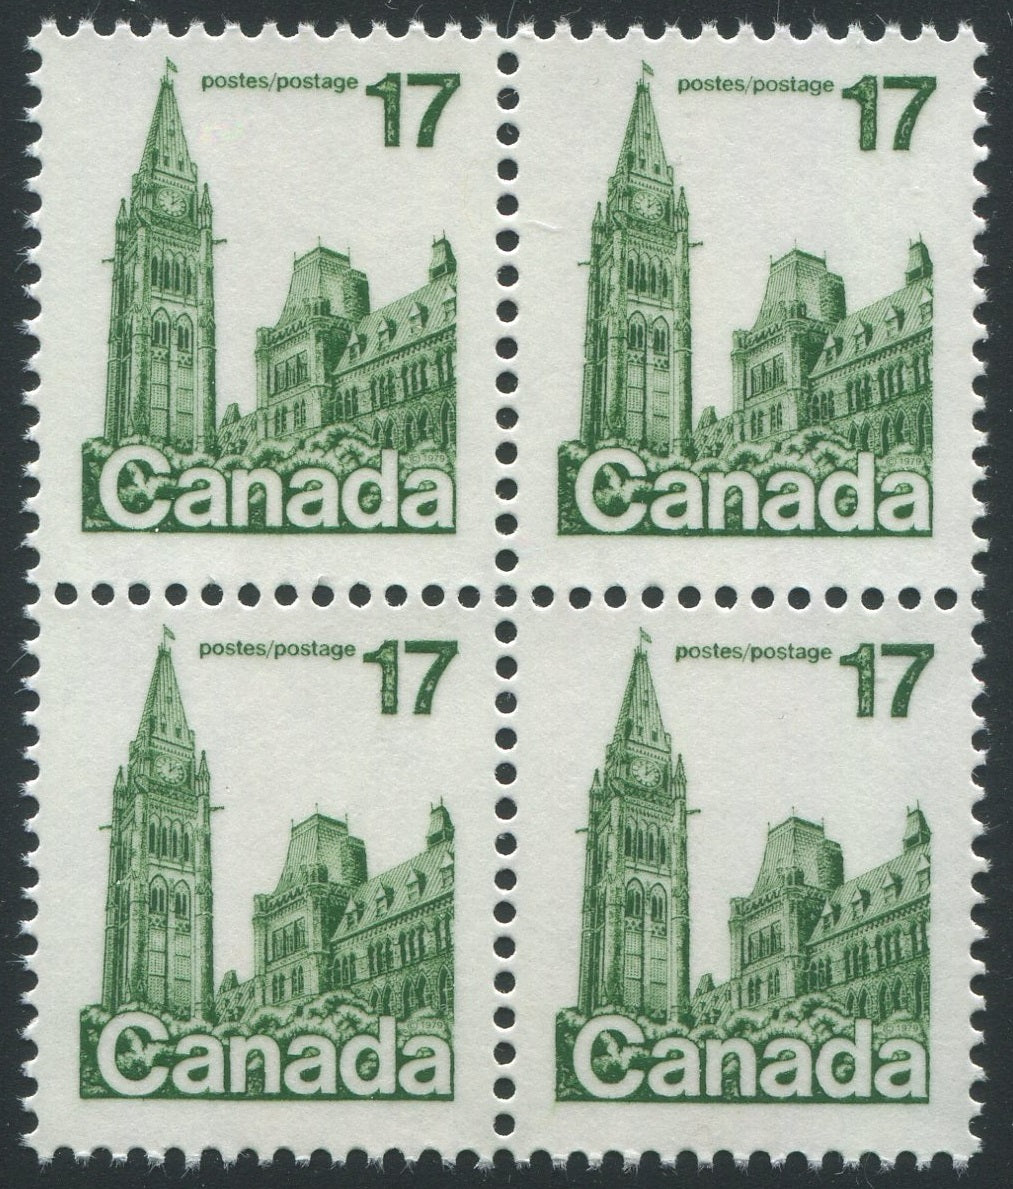 0790CA2008 - Canada #790a - Mint Block of 4, Printed on Gummed Side